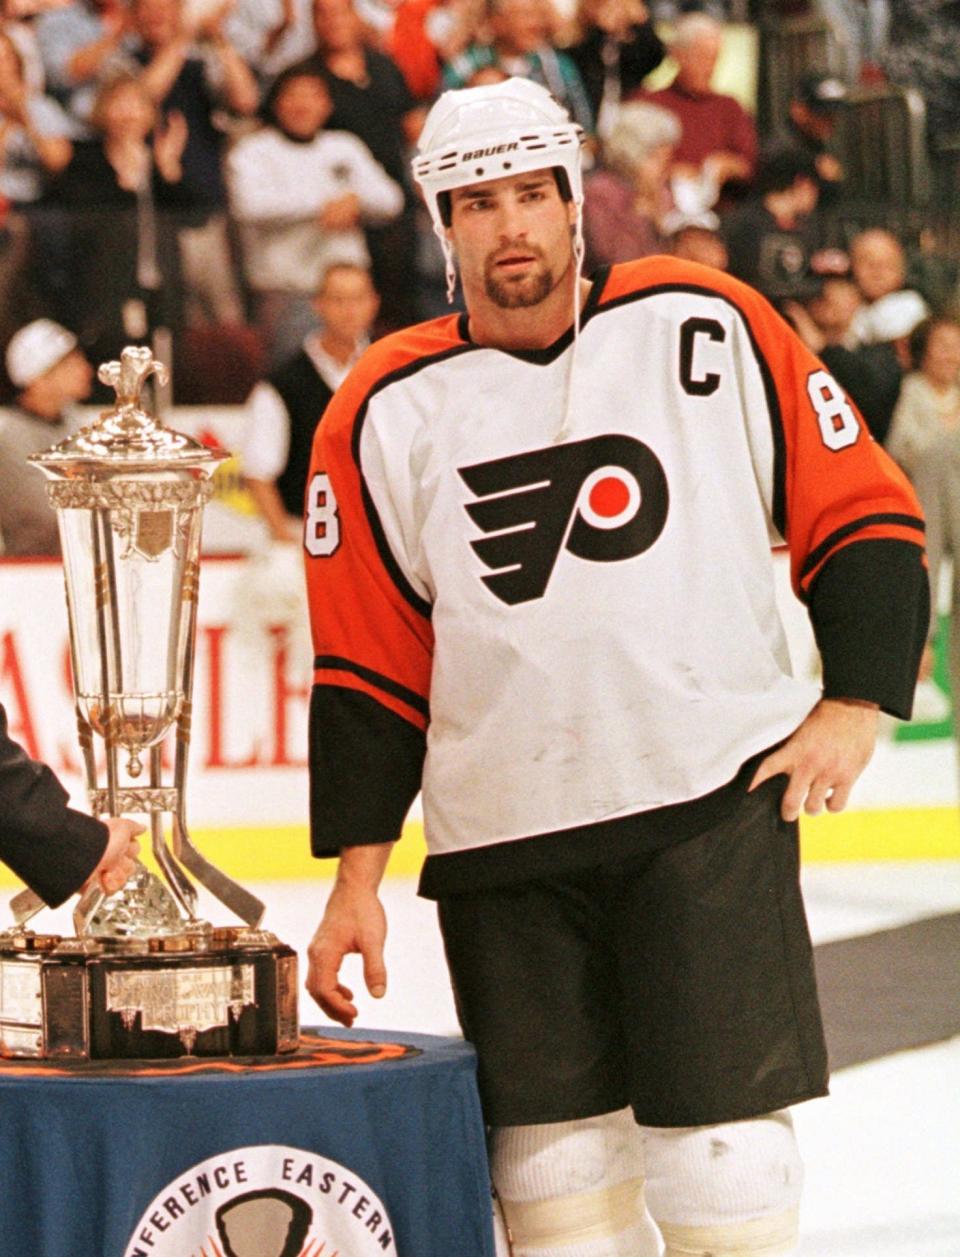 May 25, 1997: Flyers' Eric Lindros stands next to the Prince of Wales Trophy after the Flyers defeated the Rangers to win the Eastern Conference finals in Philadelphia.